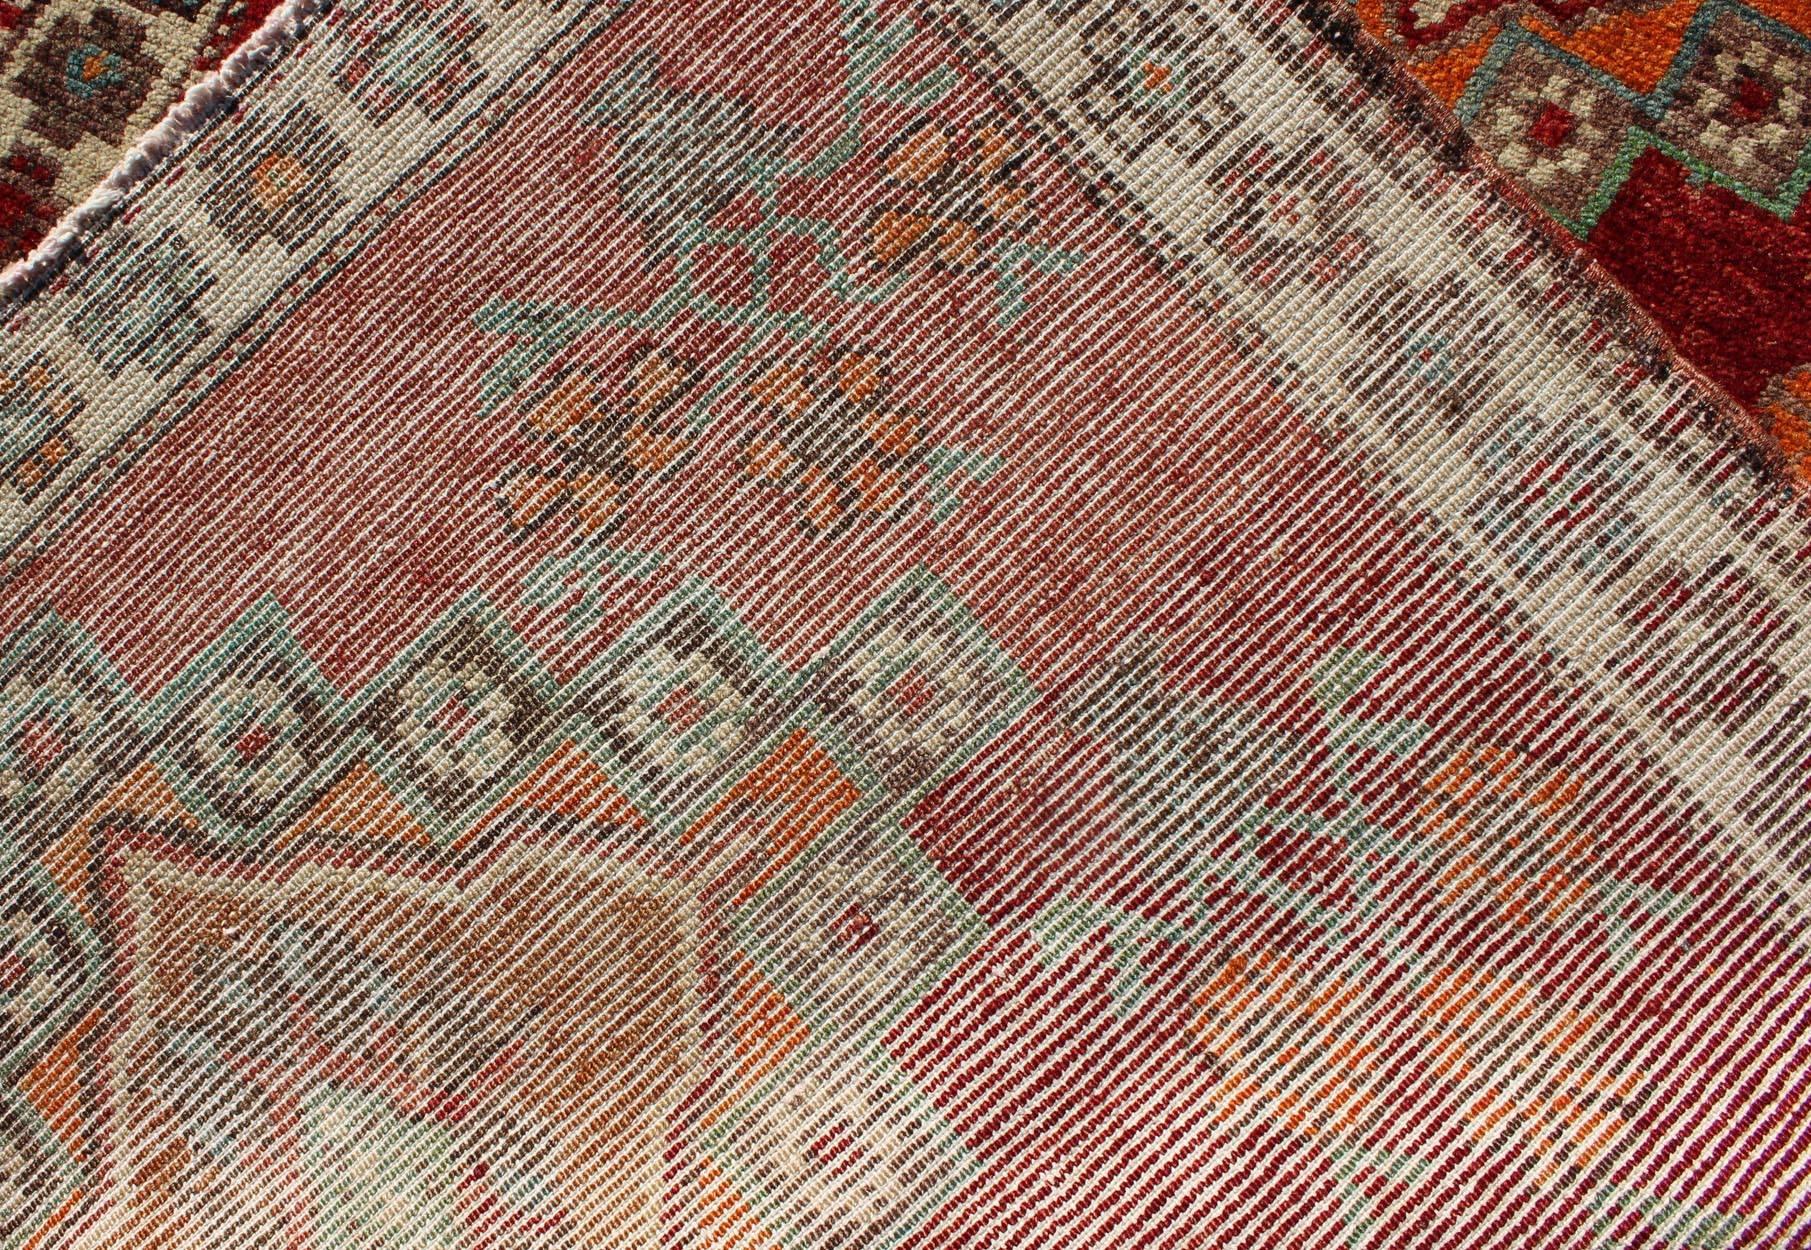 Wool Vintage Turkish Oushak Runner in Beautiful Royal Red, Light Blue/Gray and Orange For Sale